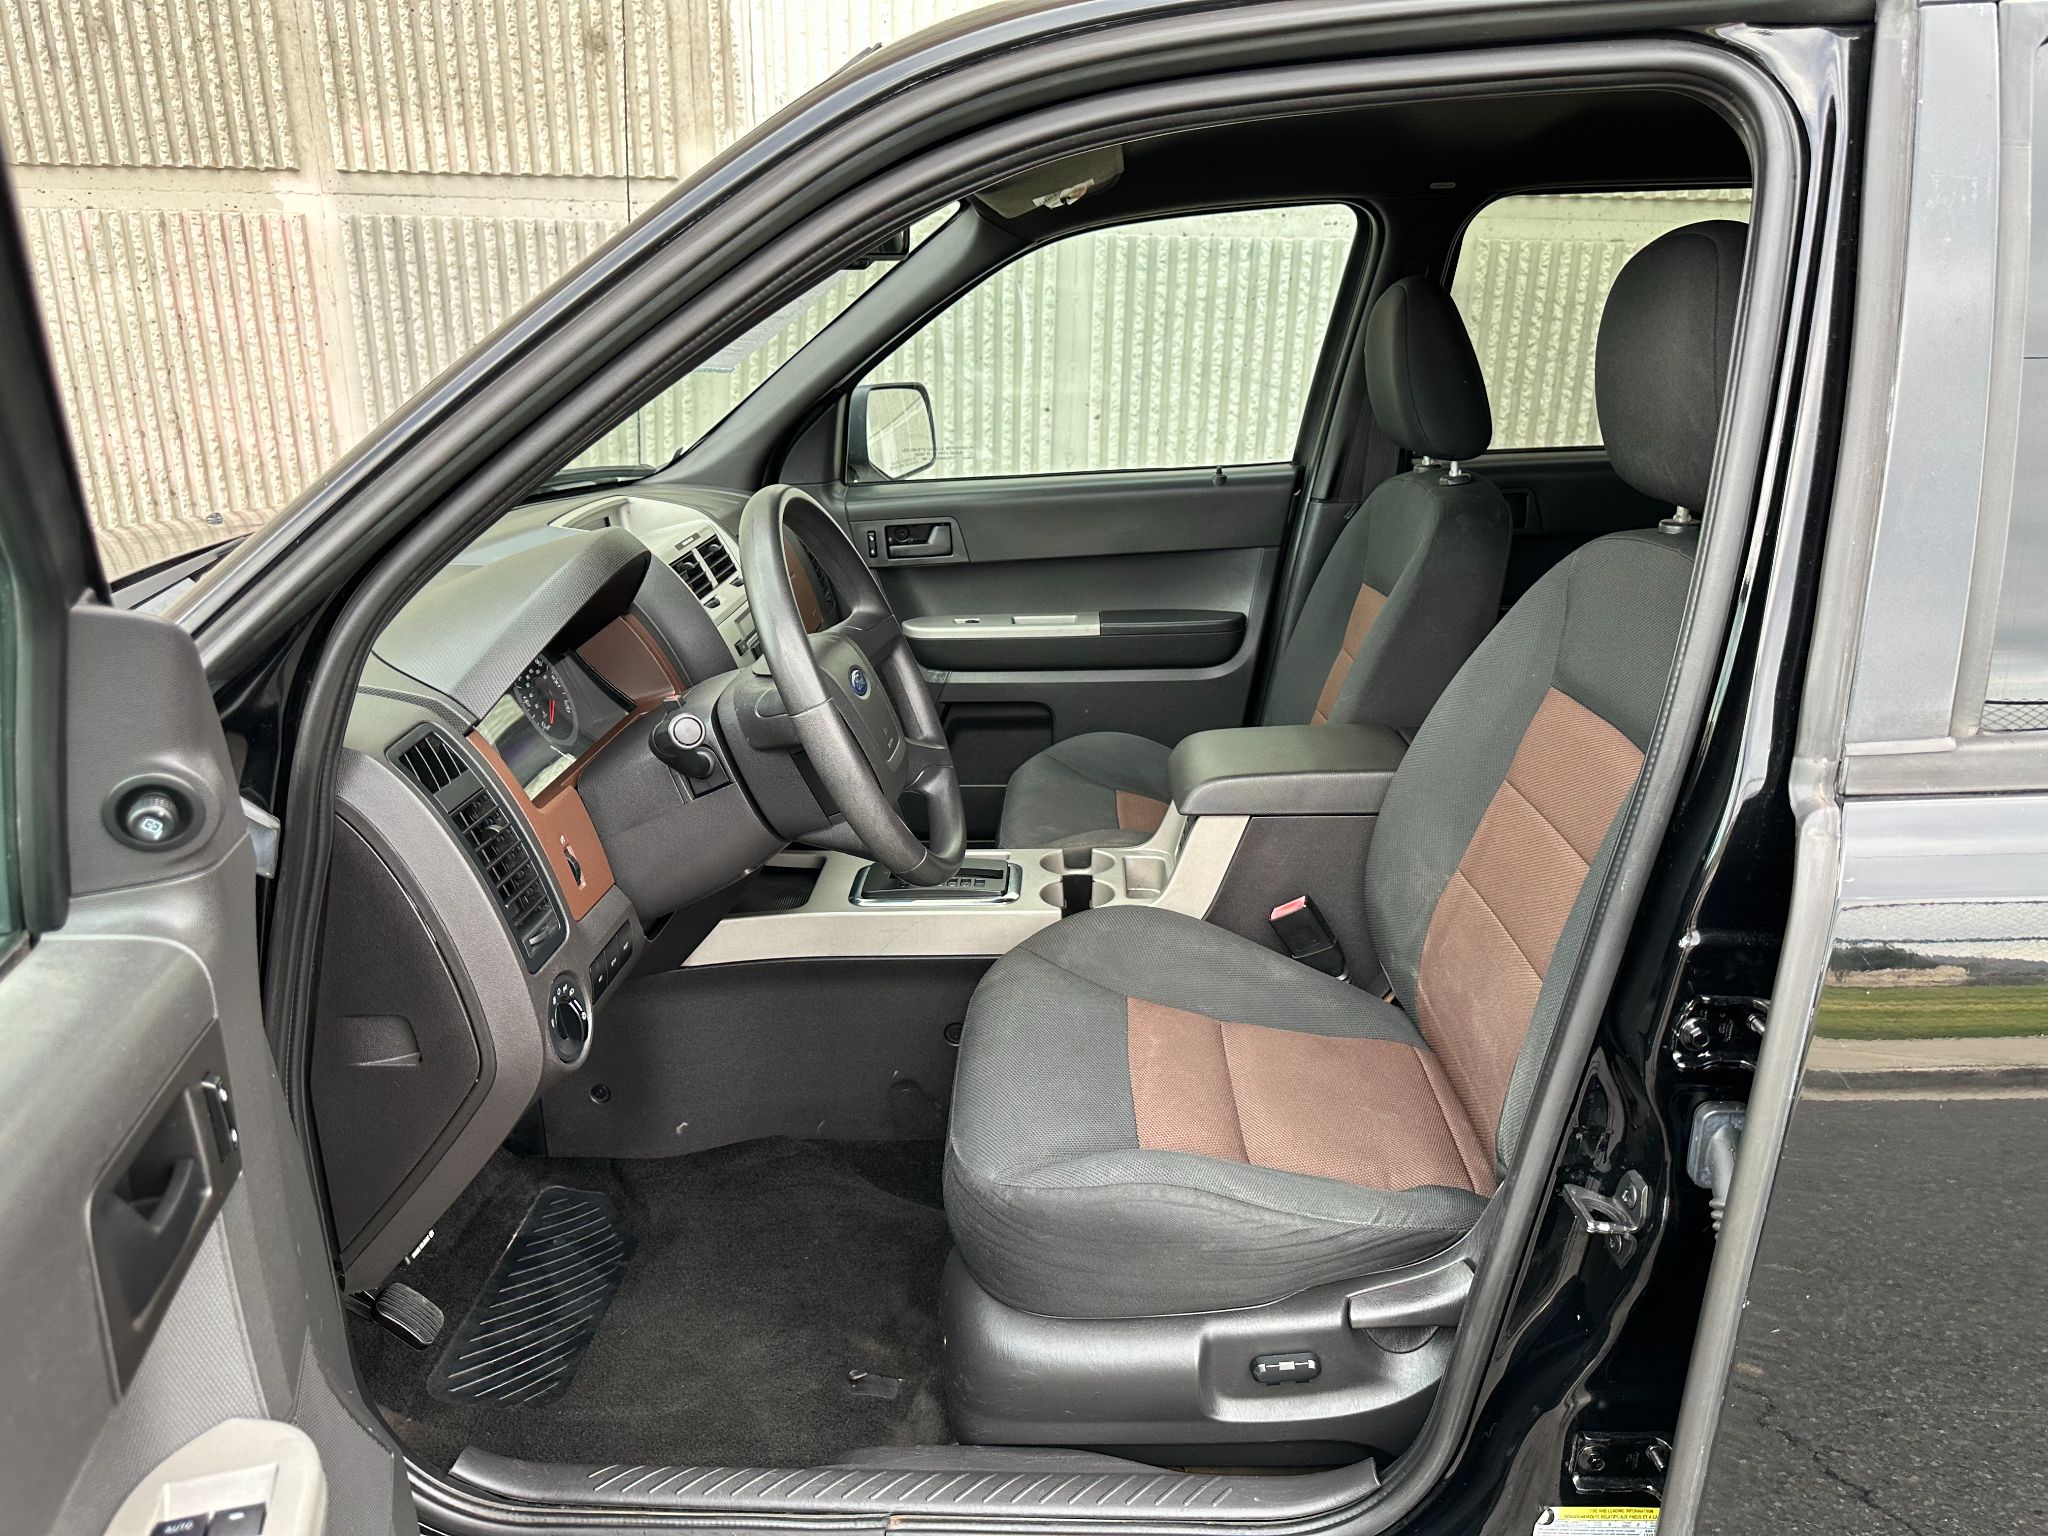 2008 Ford ESCAPE XLT